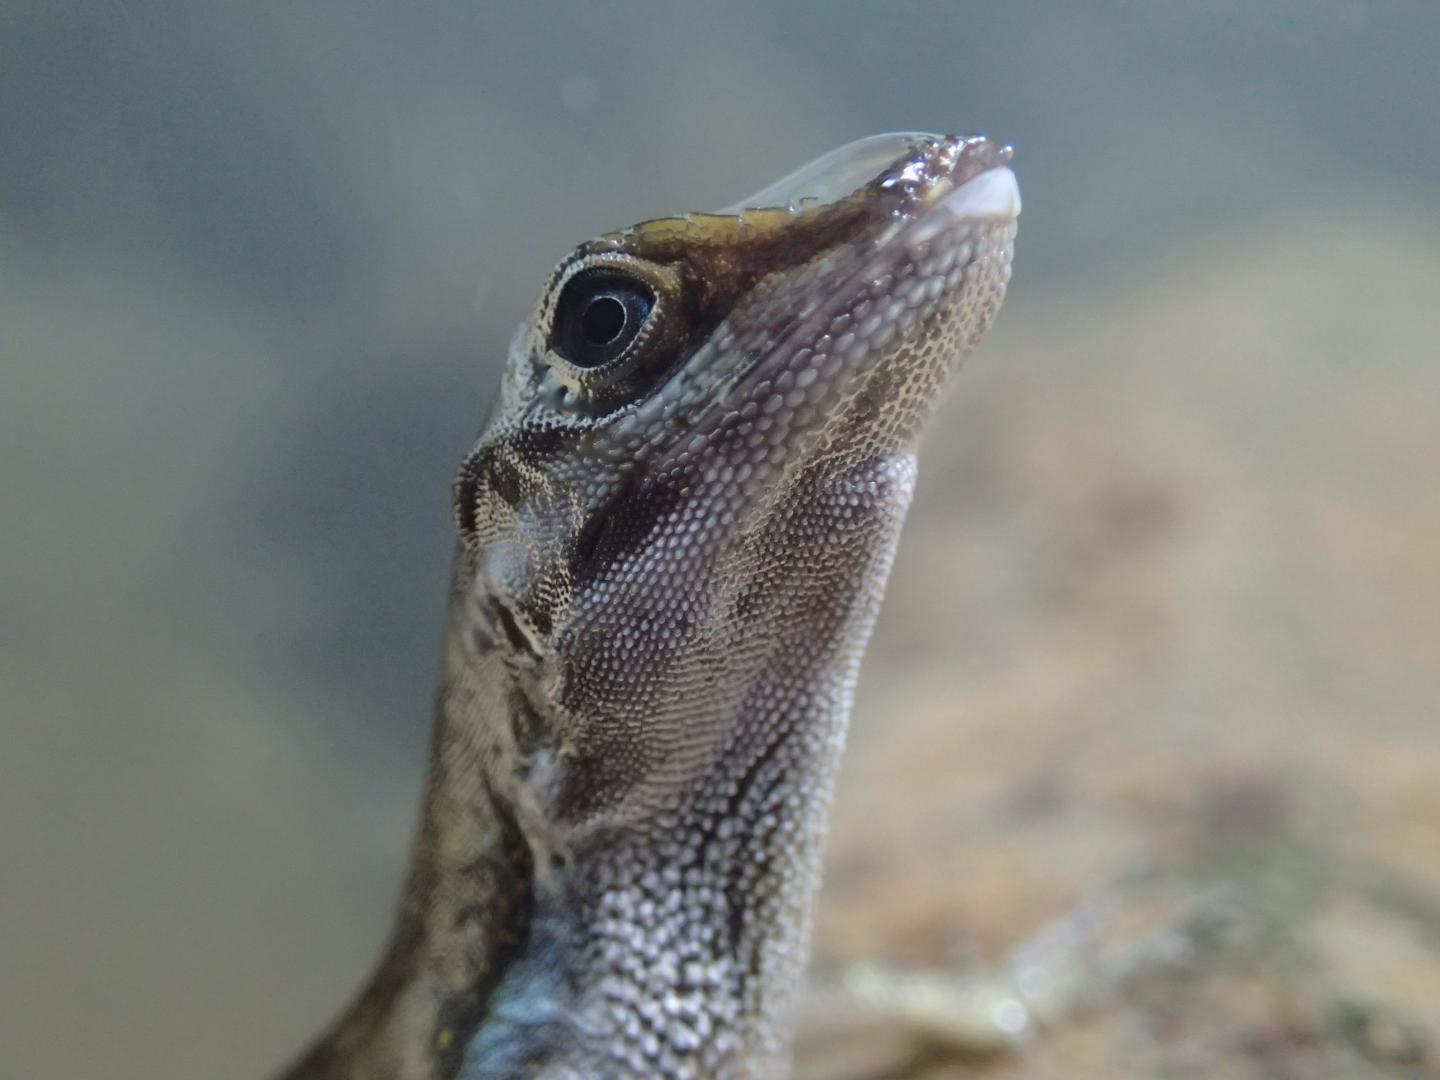 Close-up of an Anolis lizard with a rebreathing bubble on its snout